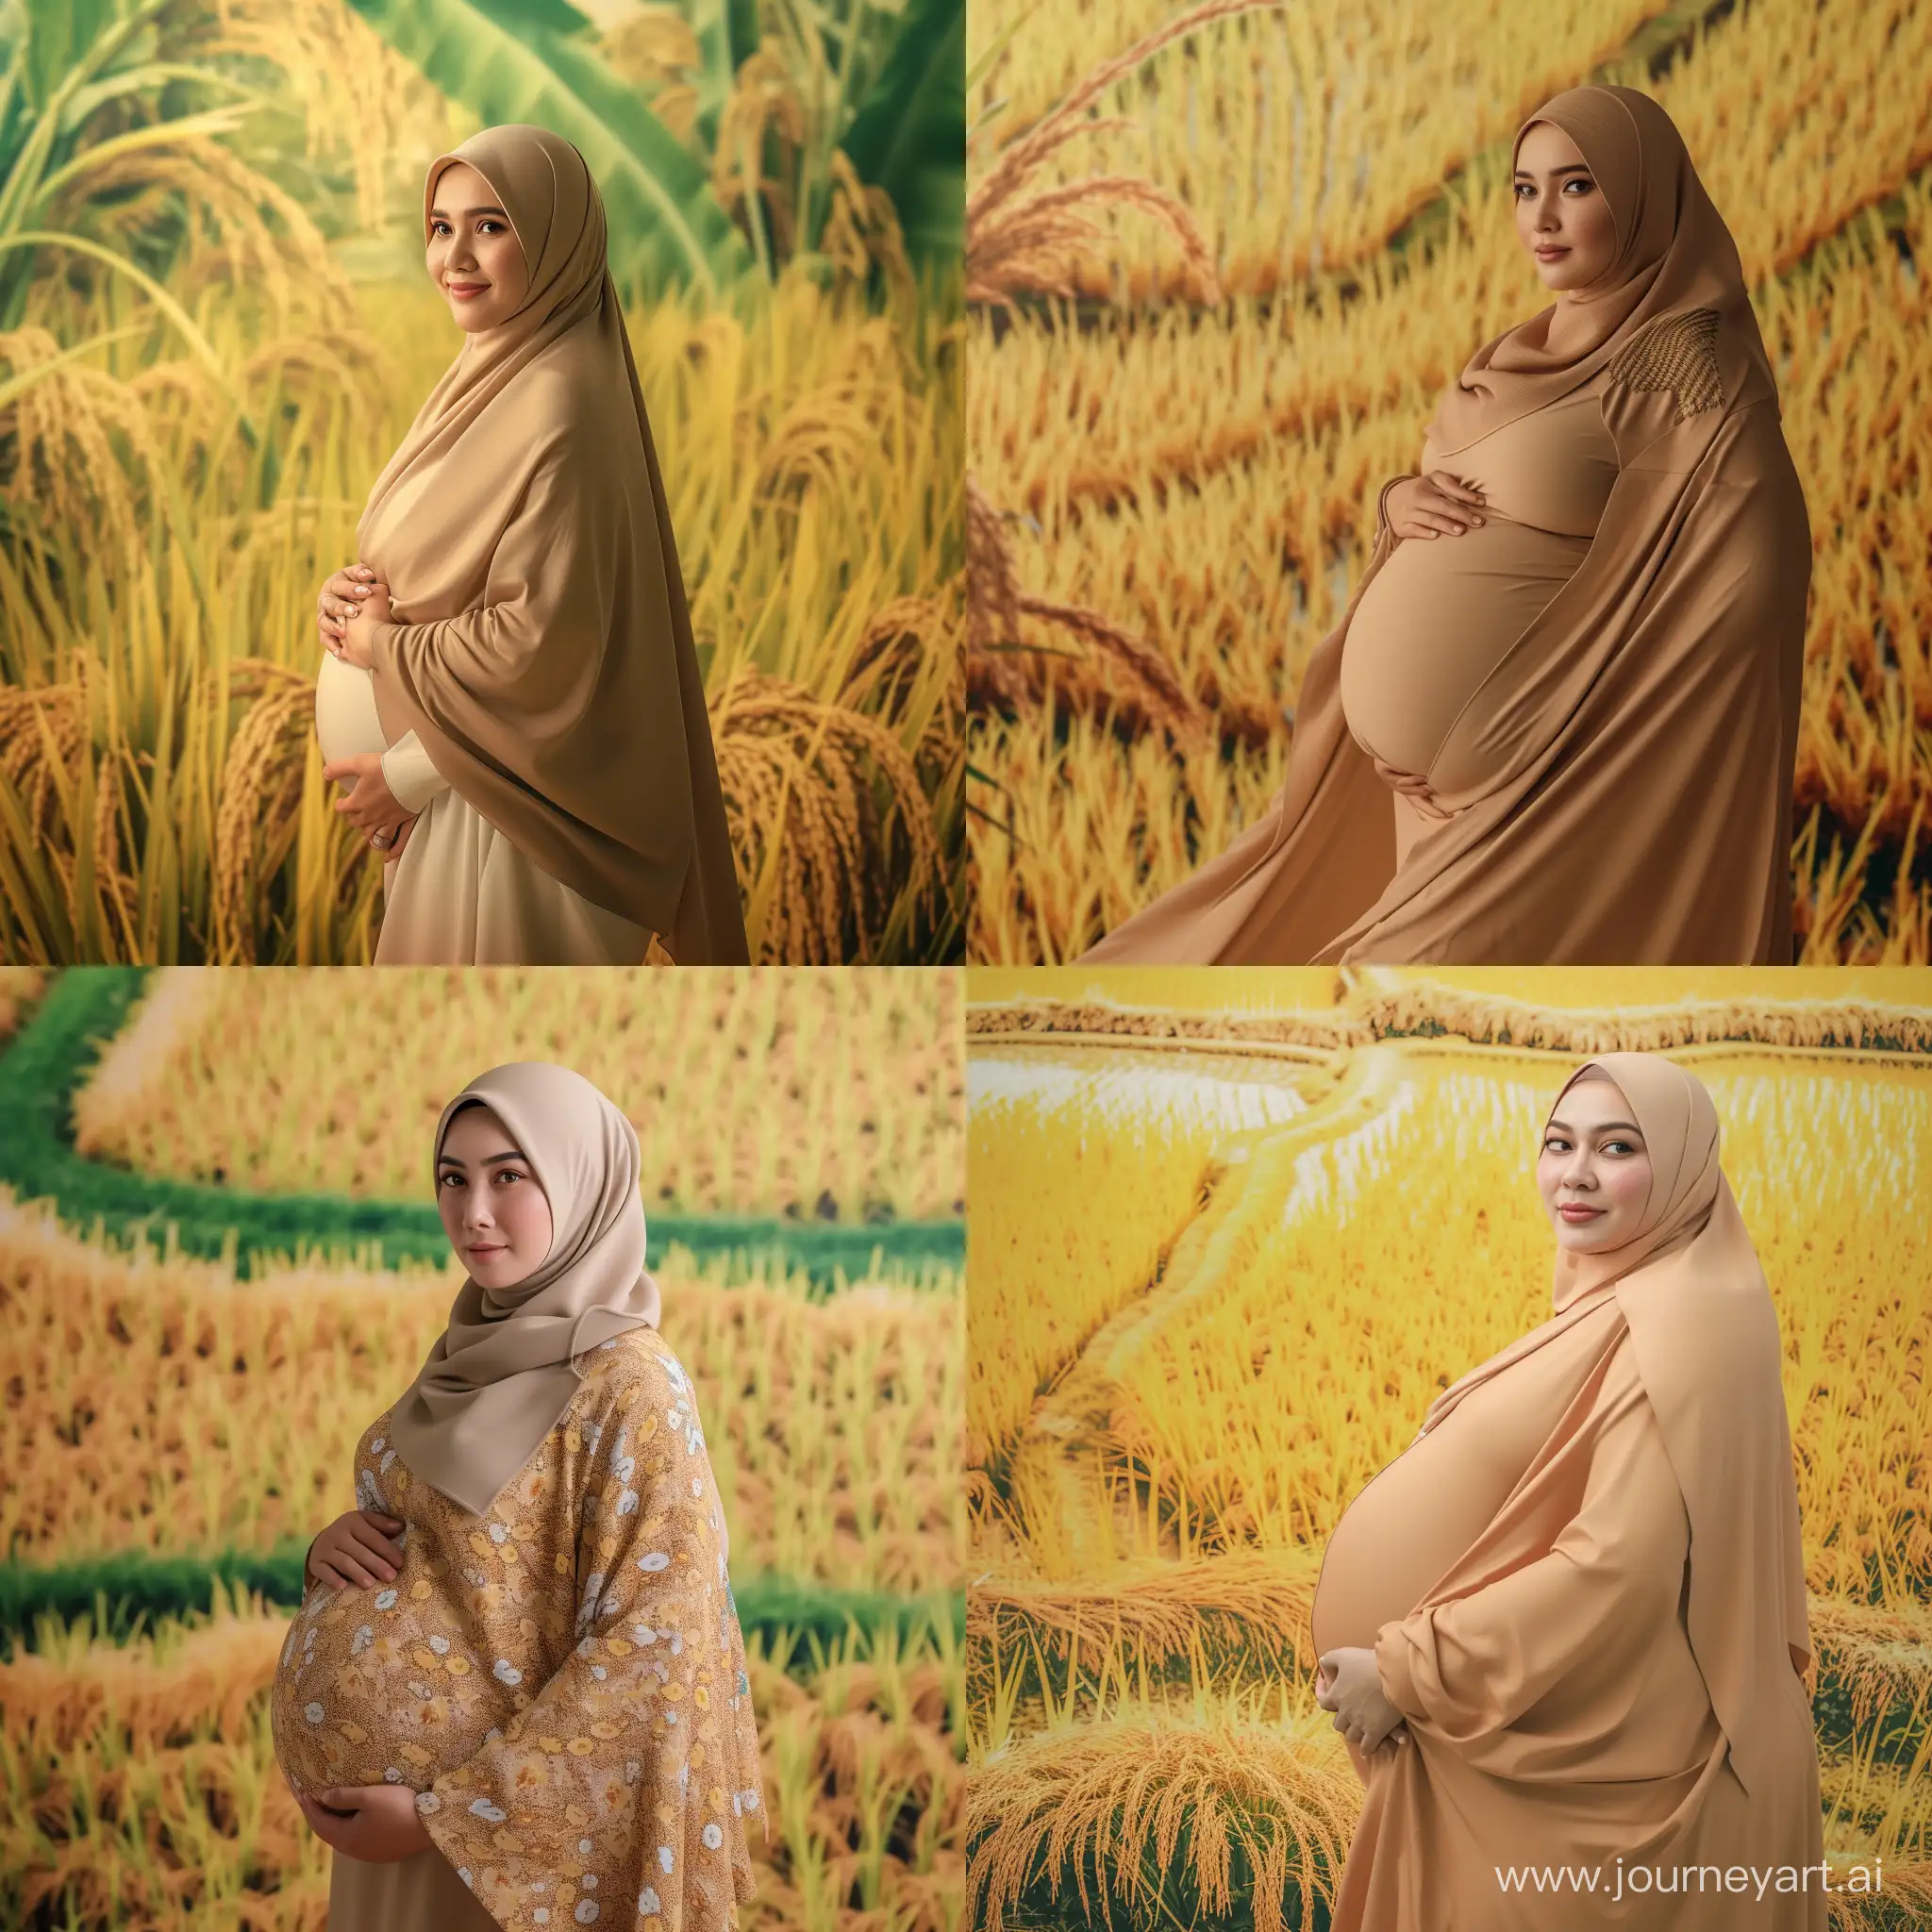 Stunning-8K-Portrait-of-a-Graceful-40YearOld-Indonesian-Woman-in-Hijab-Amidst-Golden-Rice-Fields